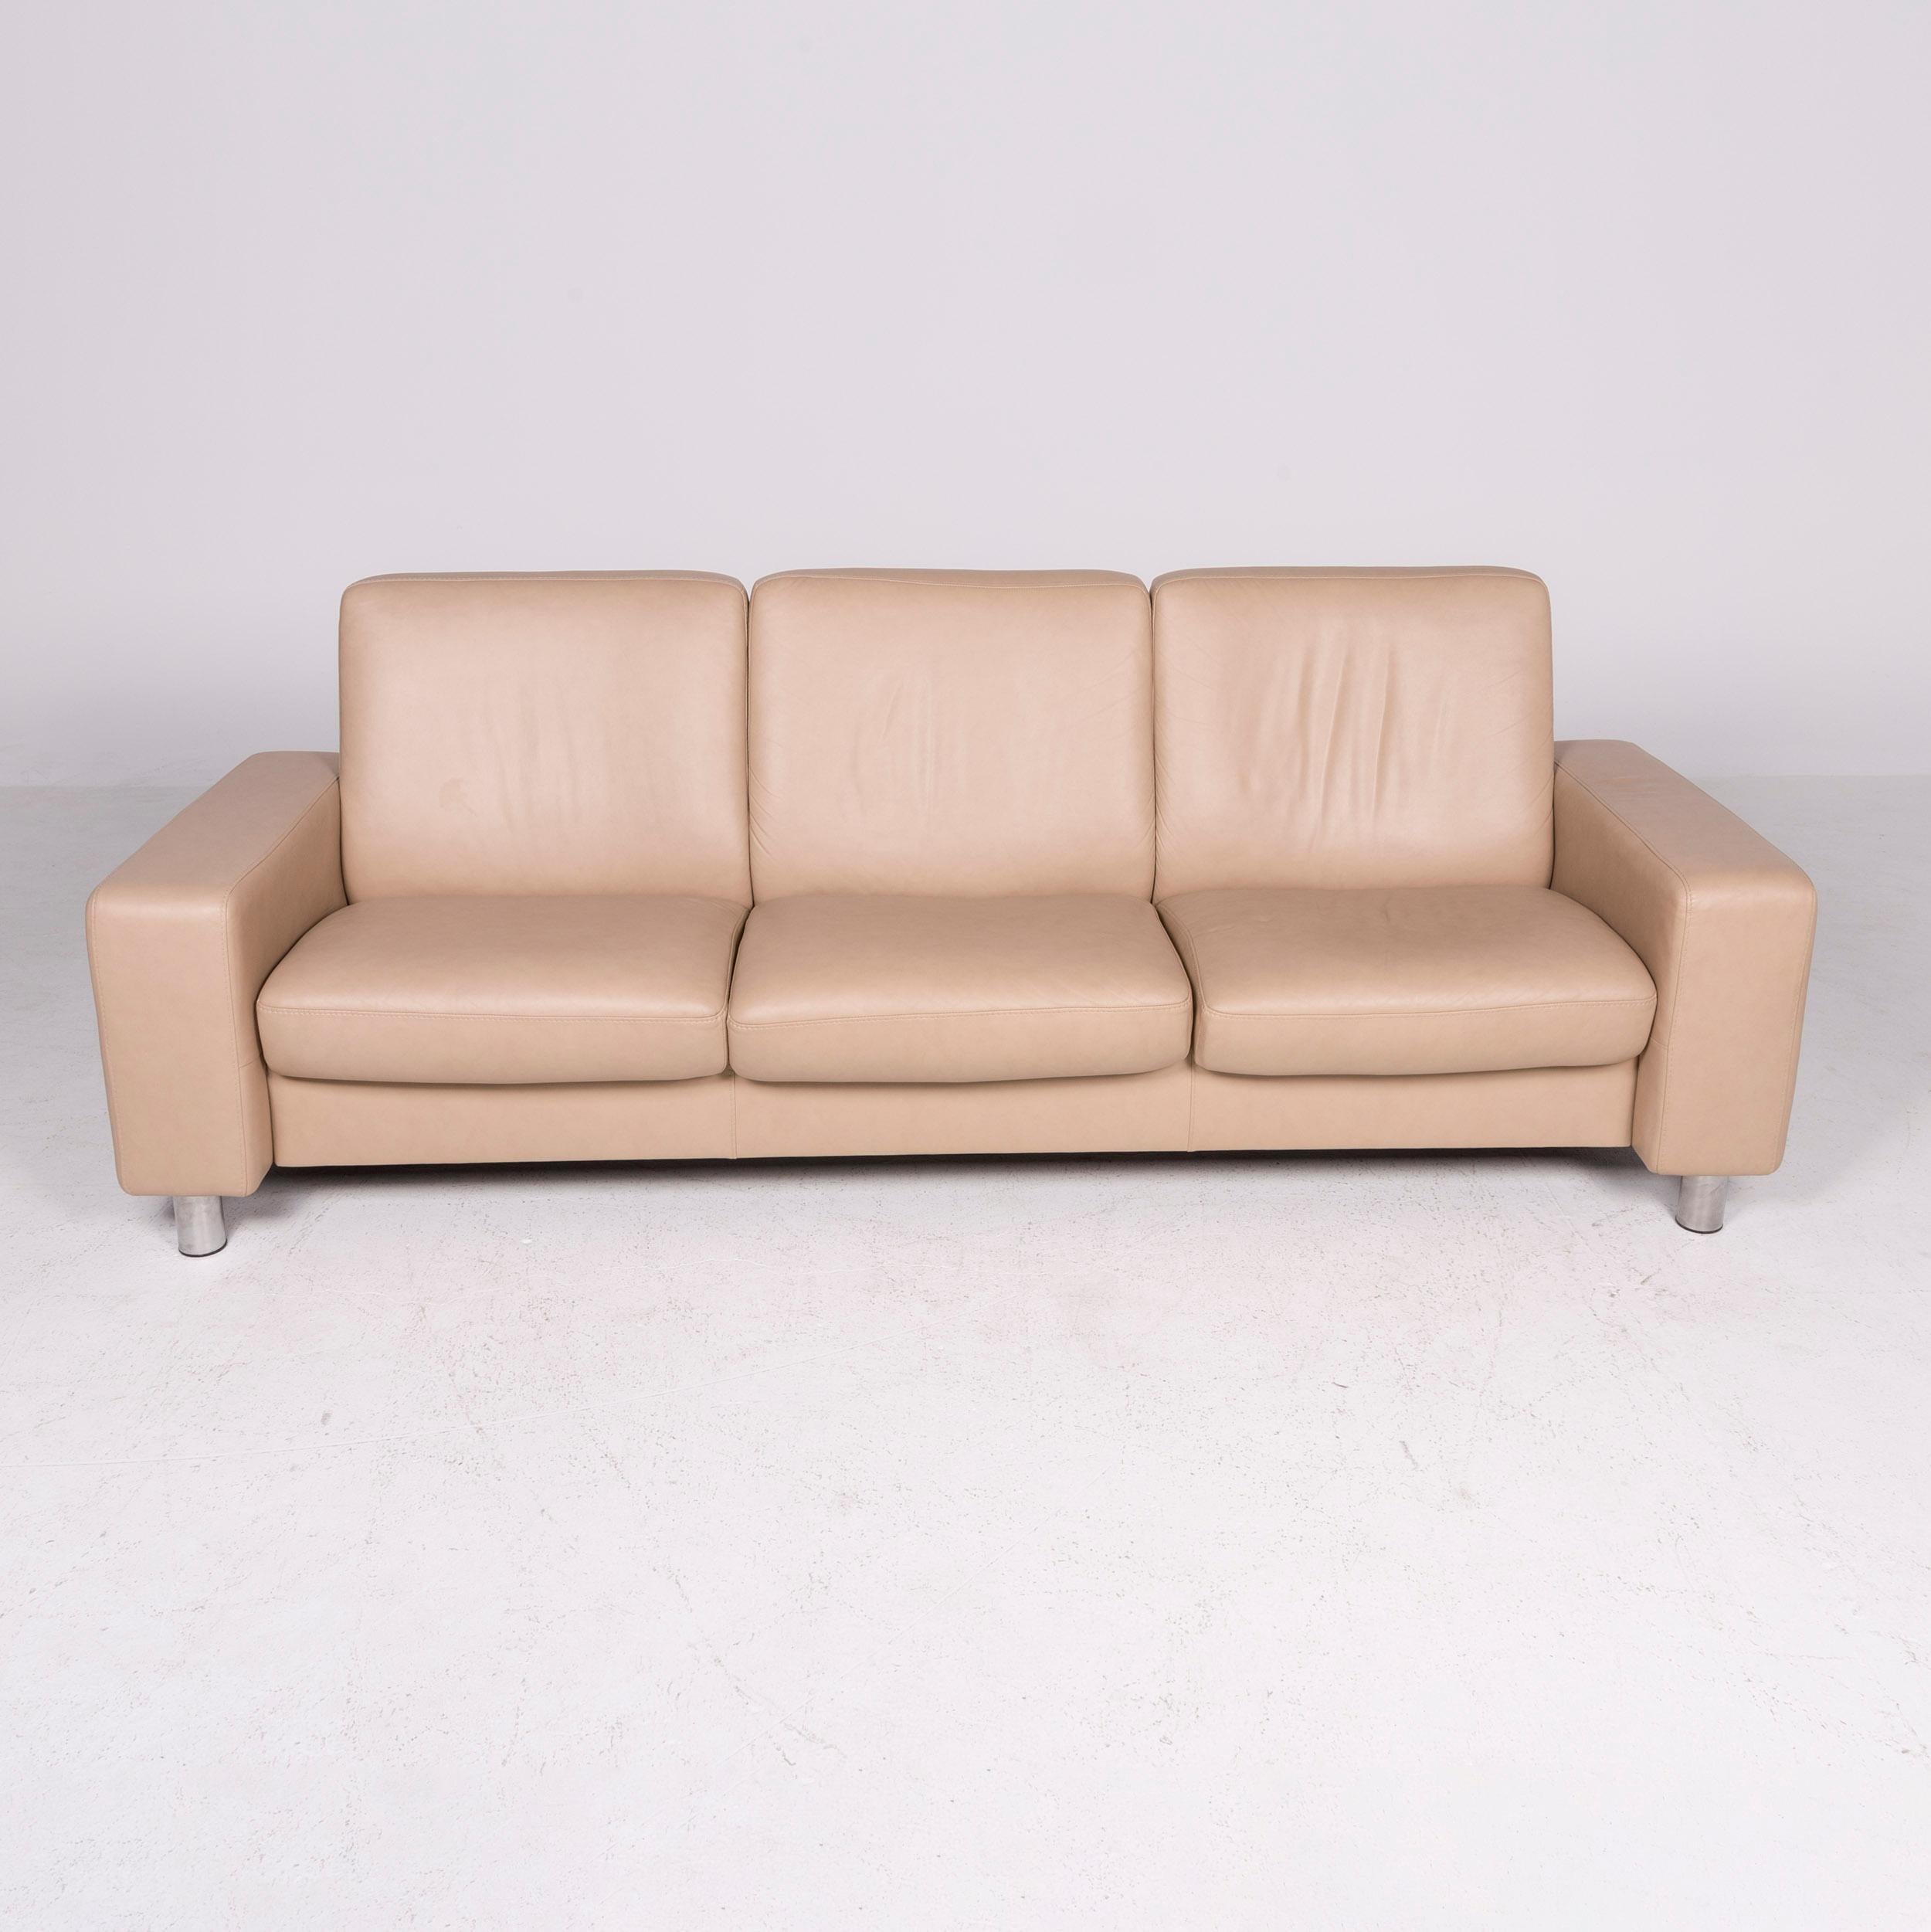 Contemporary Stressless Designer Leather Sofa Beige Genuine Leather Three-Seat Couch For Sale